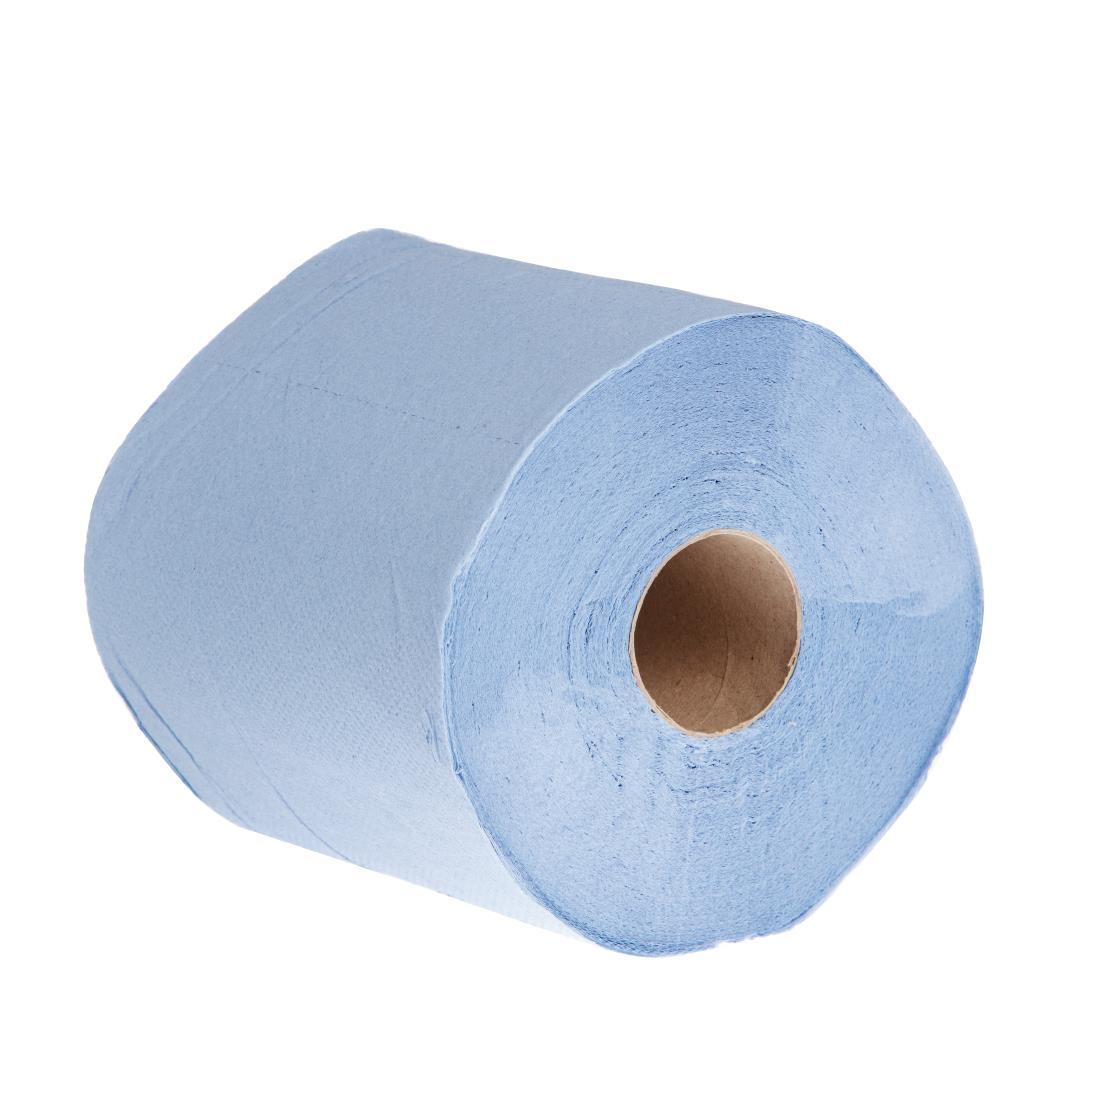 Jantex Centrefeed Blue Rolls 2-Ply 120m (Pack of 18) - CF971  - 6